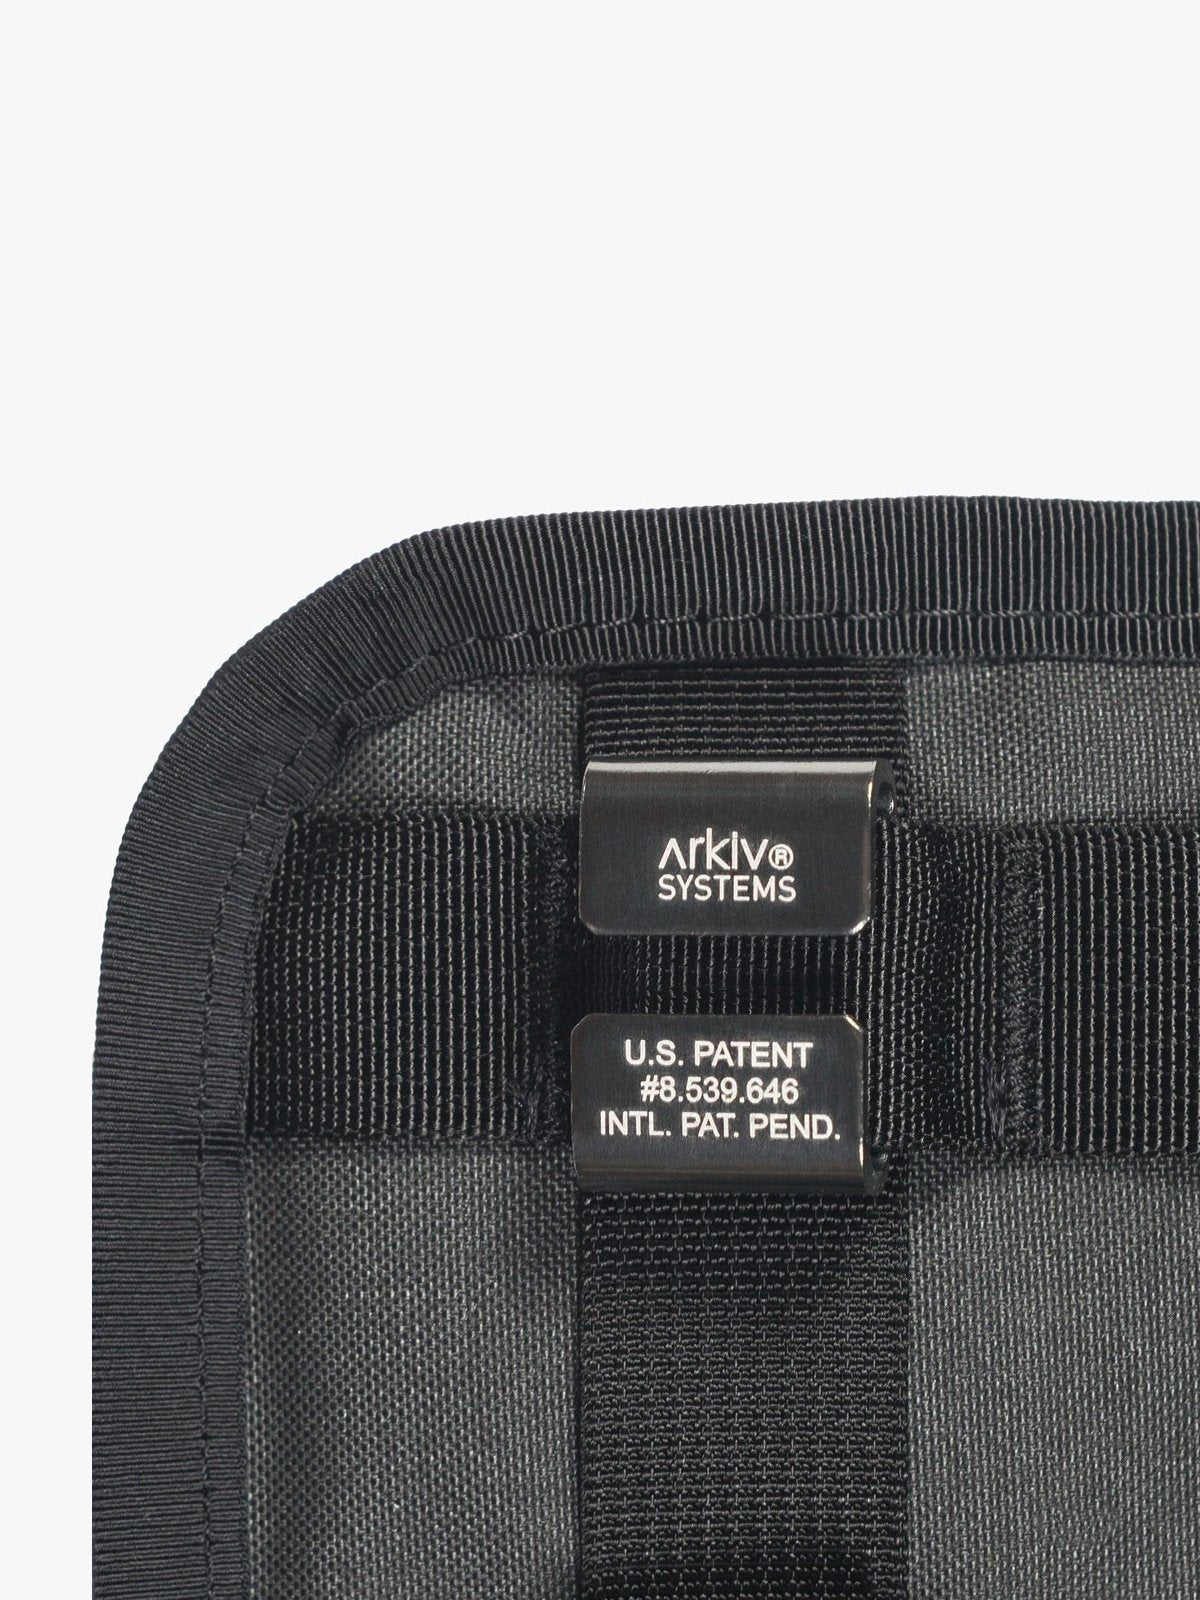 Arkiv® Four-Piece Clip Set by Mission Workshop - Weatherproof Bags & Technical Apparel - San Francisco & Los Angeles - Built to endure - Guaranteed forever